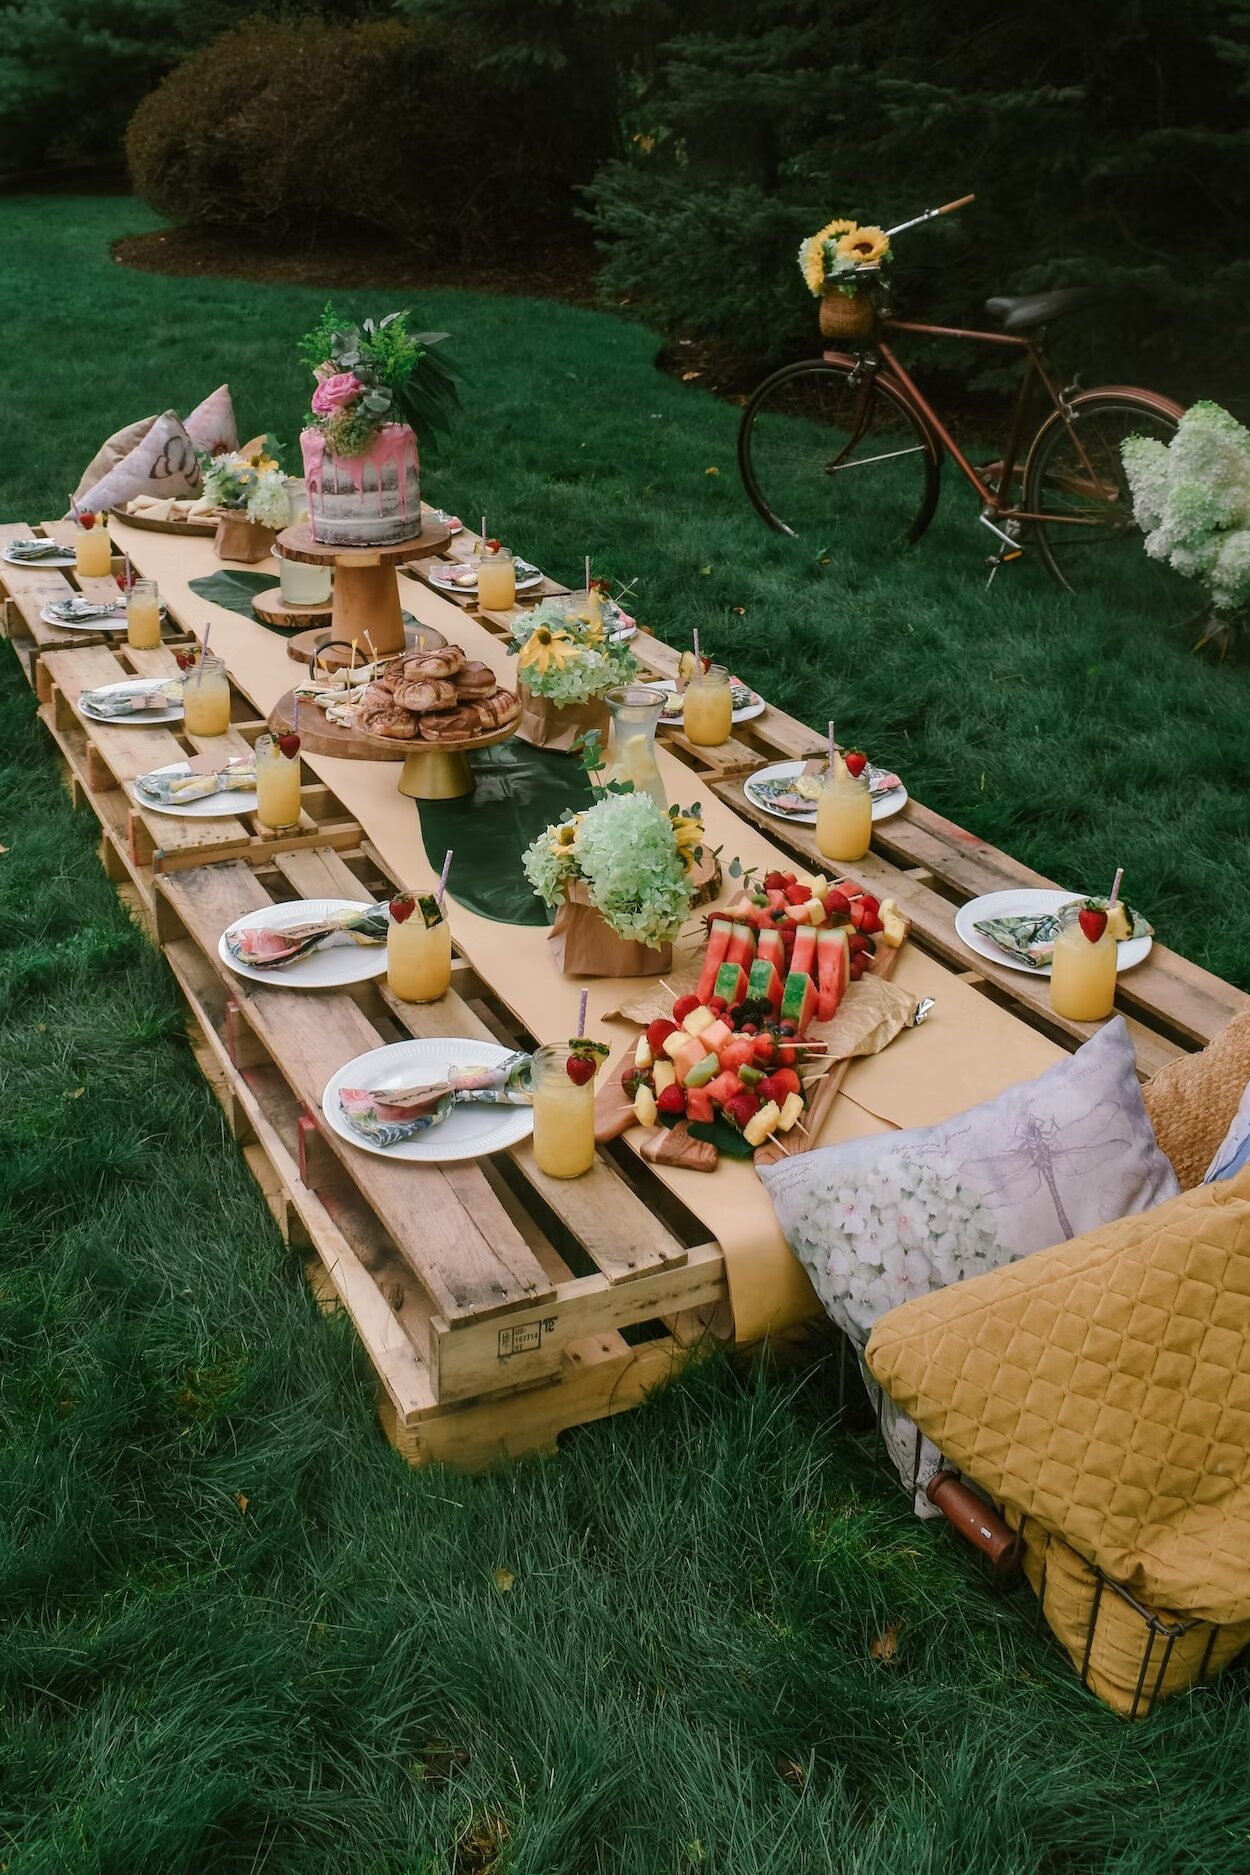 Photo of pallet table with tropical drinks, fruits, and a cake on the table runner as an engagement party idea